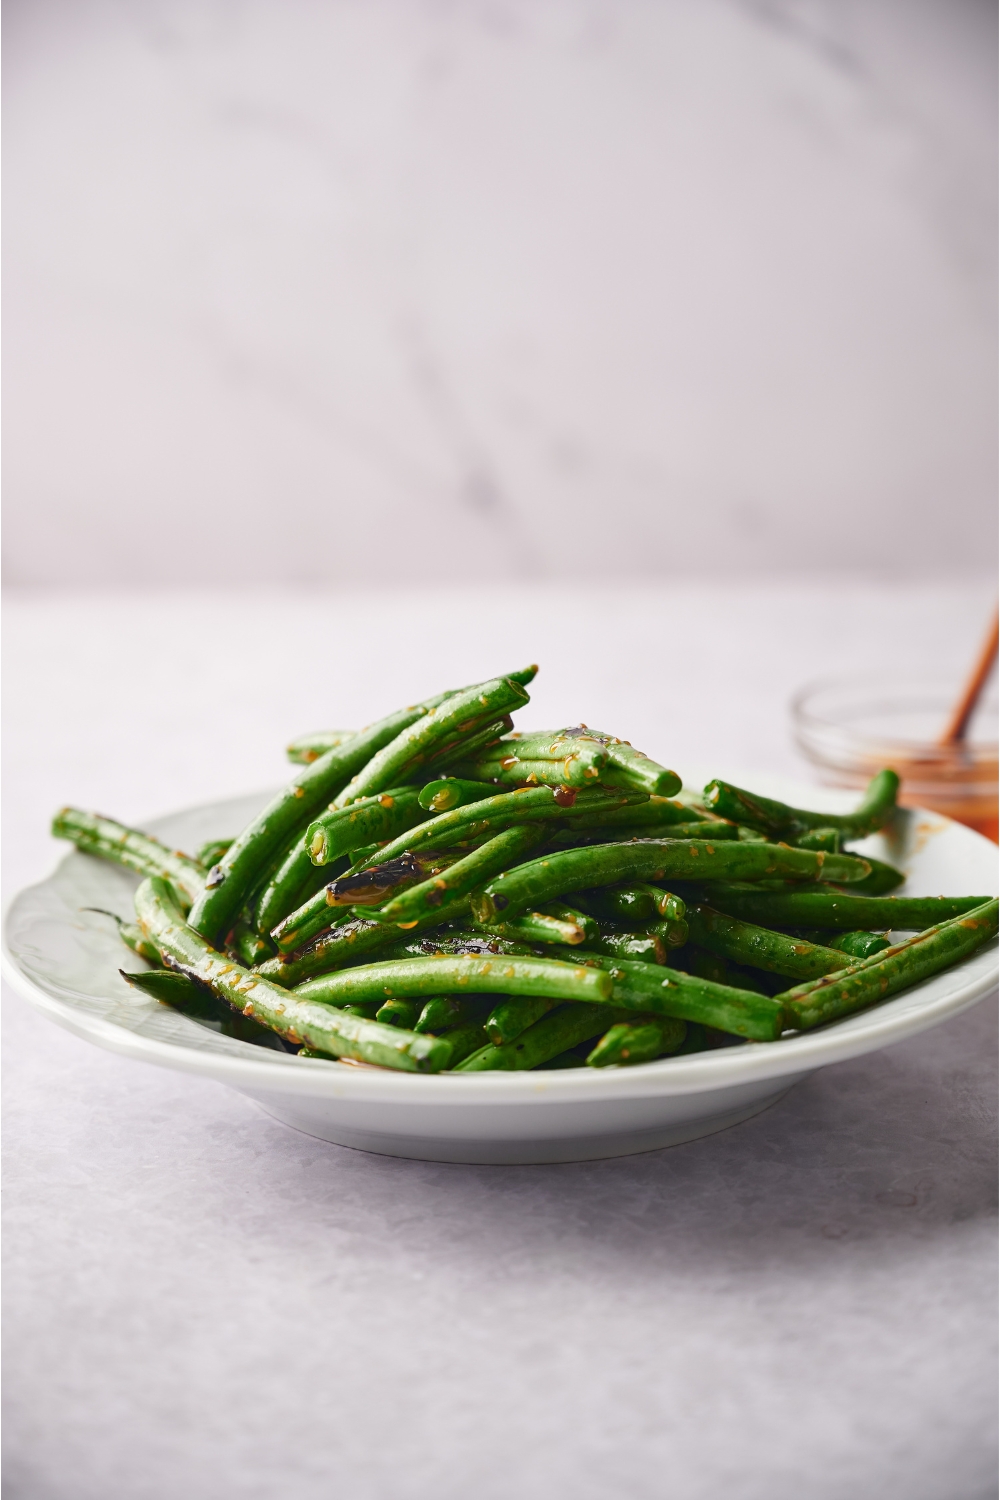 A white bowl filled with cooked and seasoned green beans. There is a bowl of honey in the background.